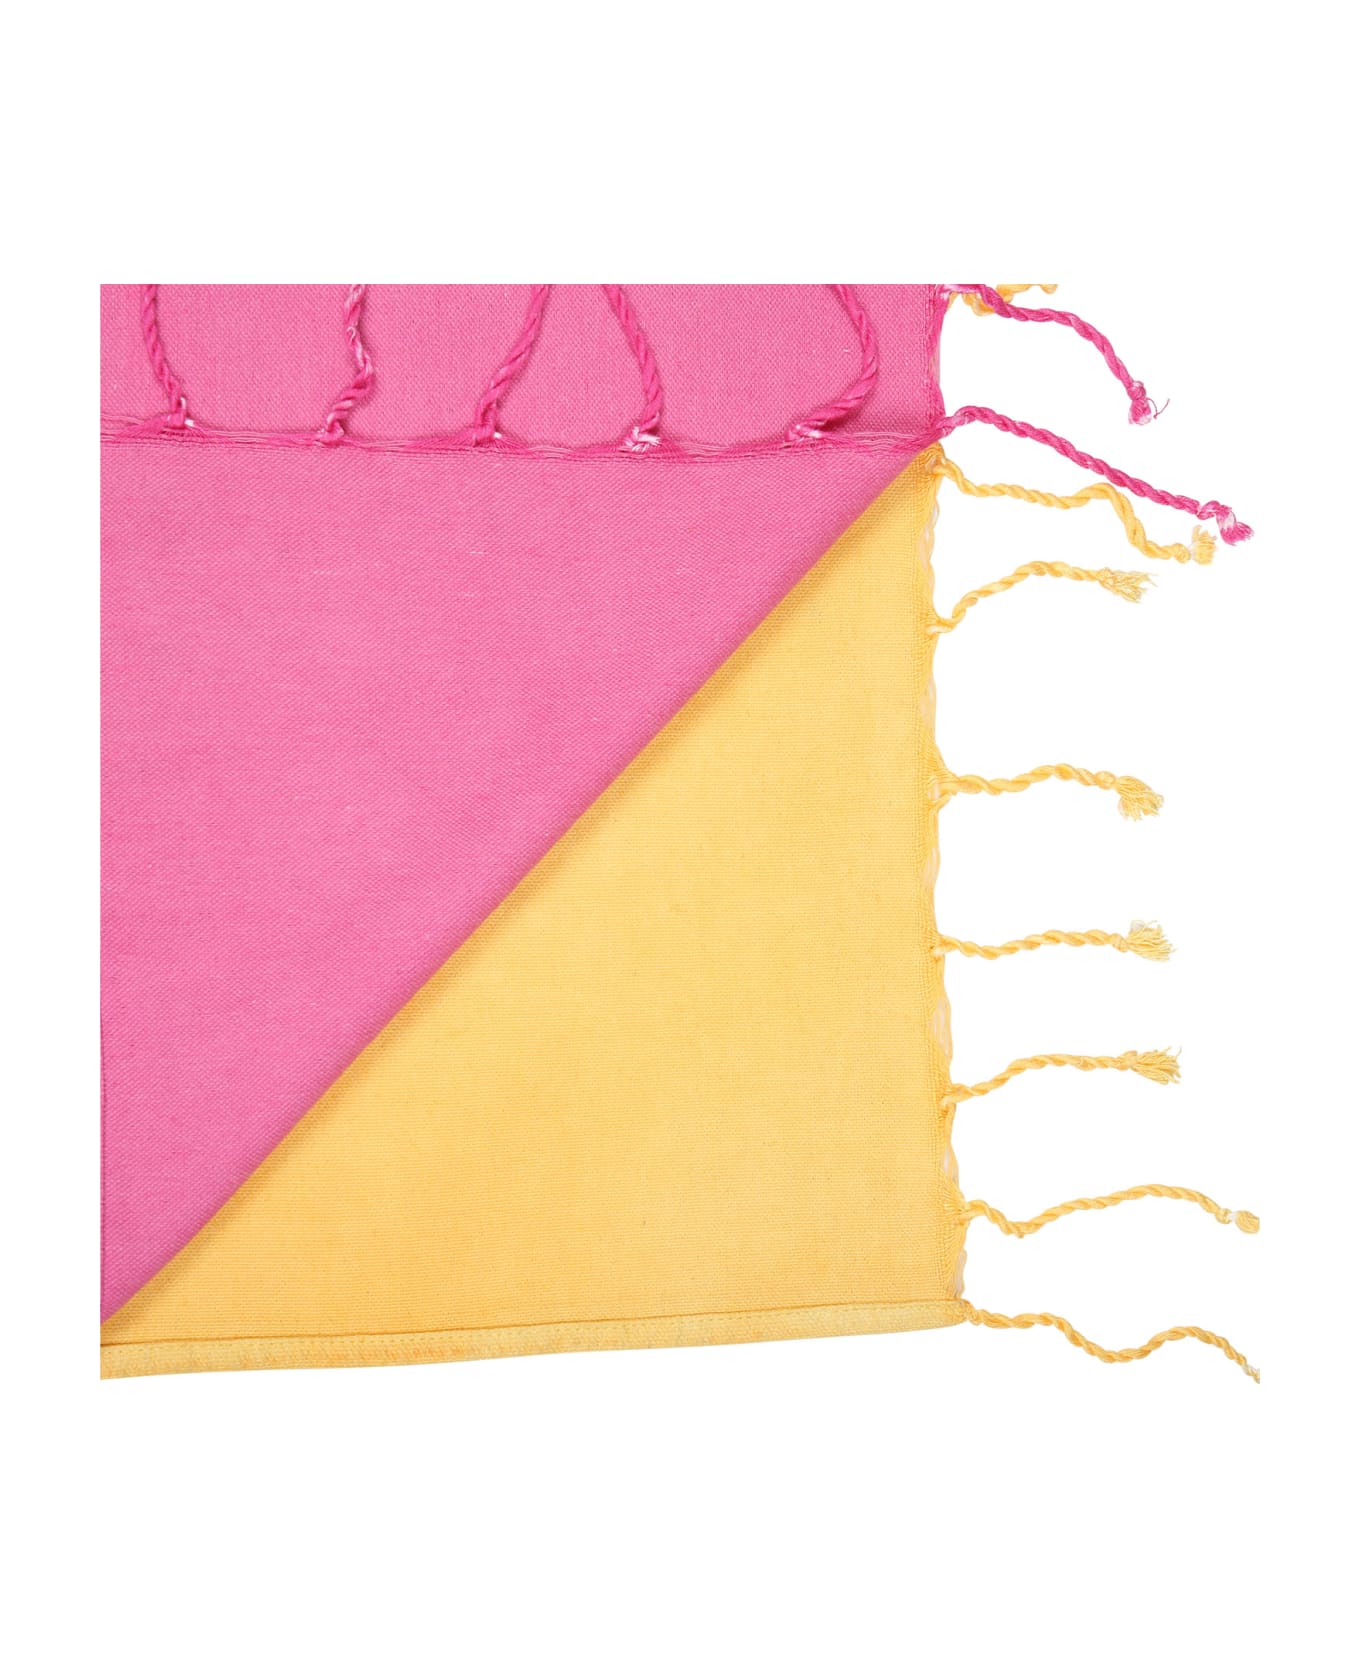 Chloé Pink Beach Towel For Girl With Logo - Multicolor アクセサリー＆ギフト